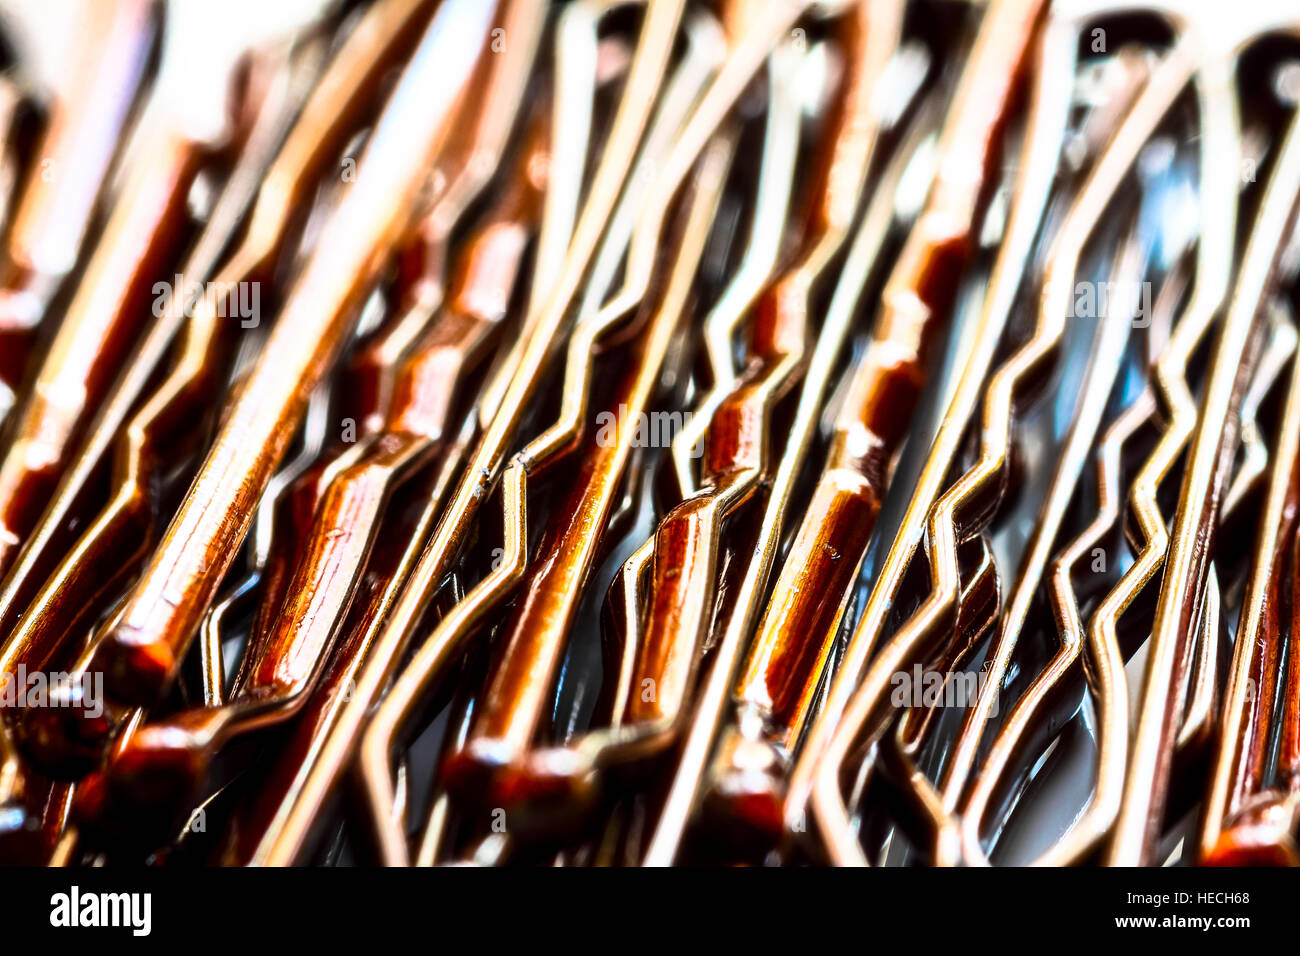 Close up view of metal wavy hair clips Stock Photo